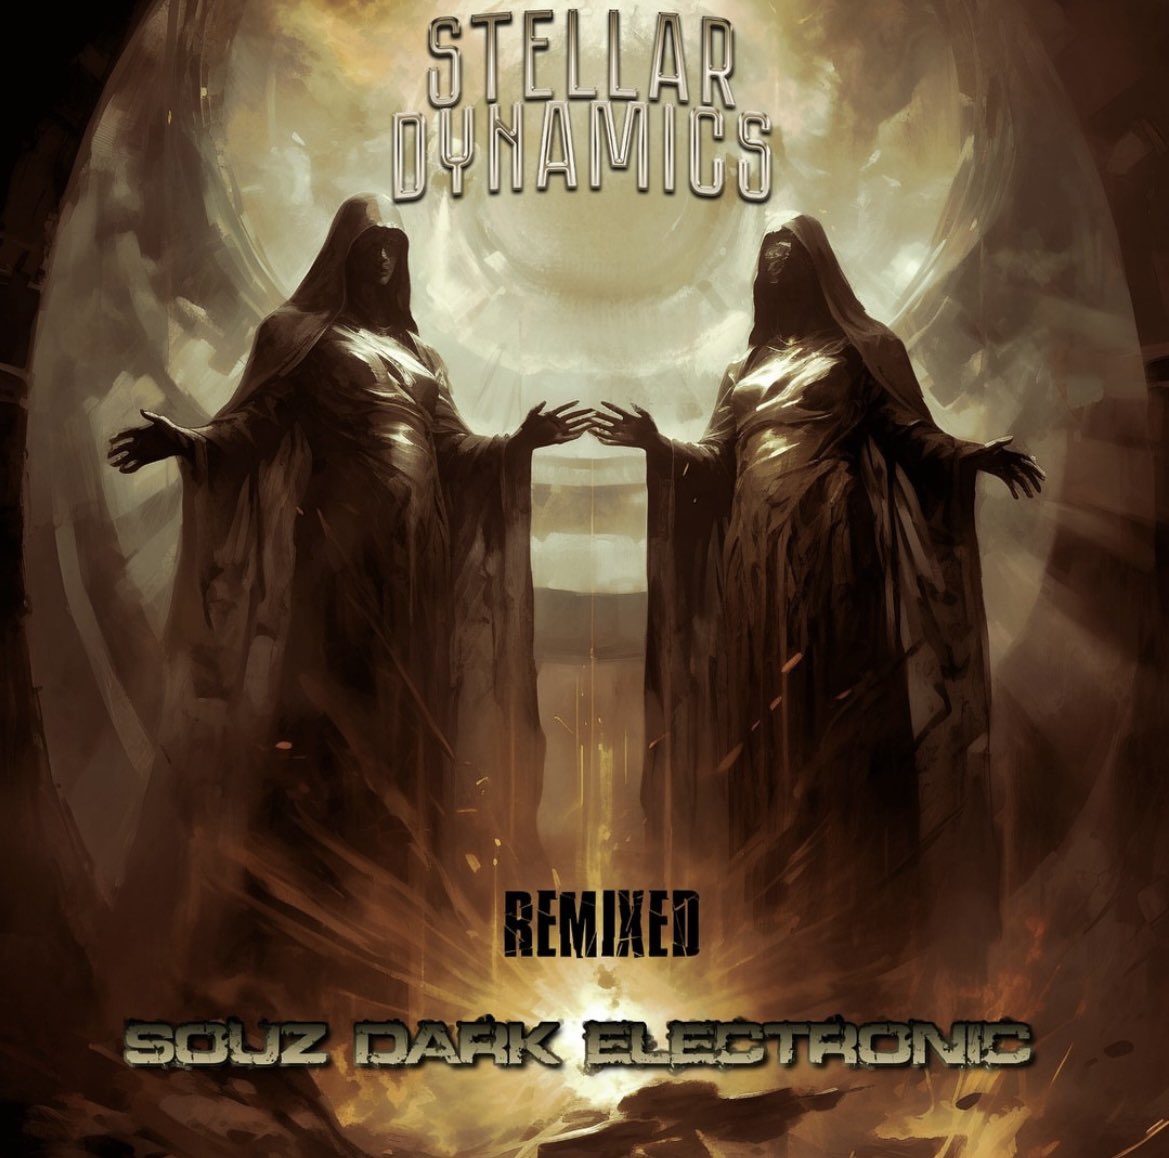 The 10th Year Anniversary of STELLAR DYNAMICS comes with some awesome and memorable new versions, collaborations and Remixes of key tracks. dsbp.bandcamp.com/album/remixed #industrialmusic #gothmusic #Industrial #Industrialelectric #goth #aggrotech #horrormusic #heavyelectronic